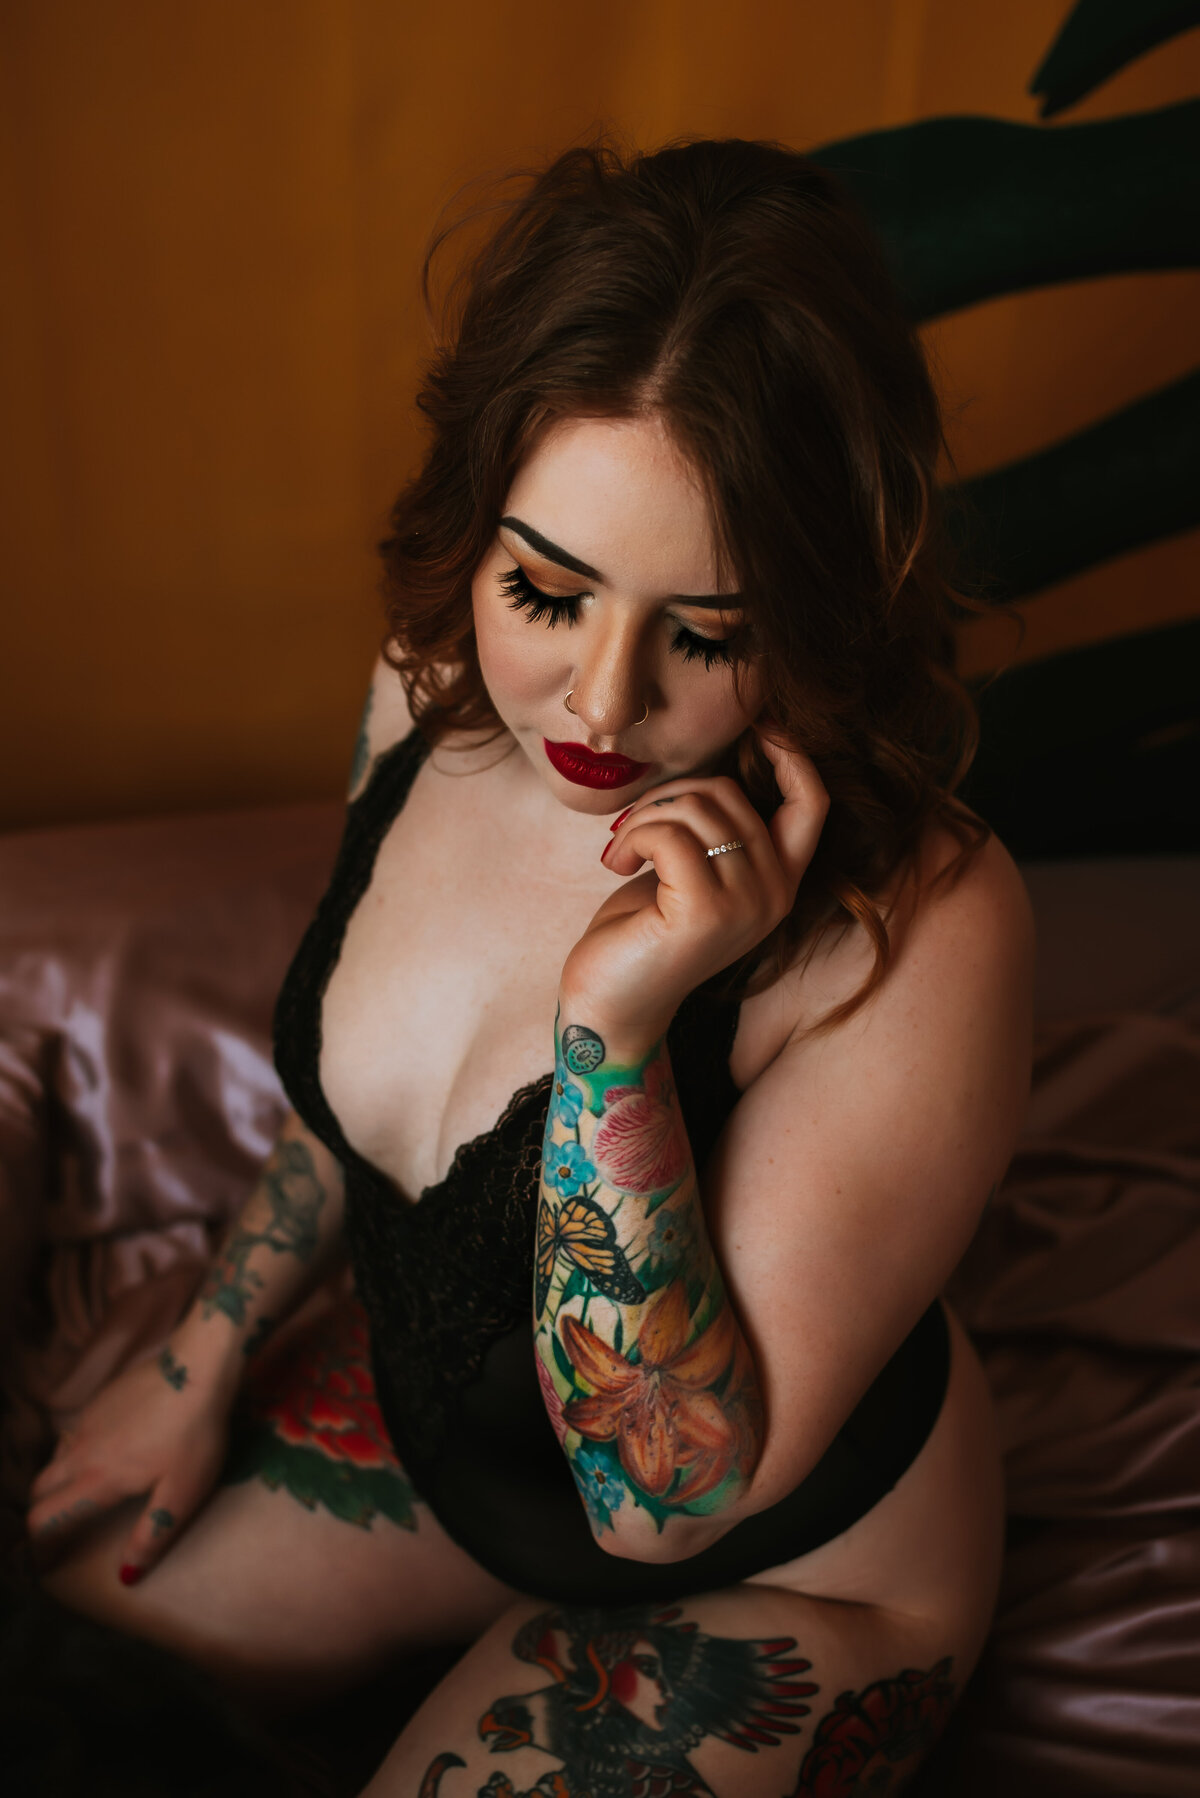 Riley Laurel Boudoir is a luxury boudoir experience located in Kamloops, British Columbia. Take a look at our portfolio to see our most recent work with our client, Katie.